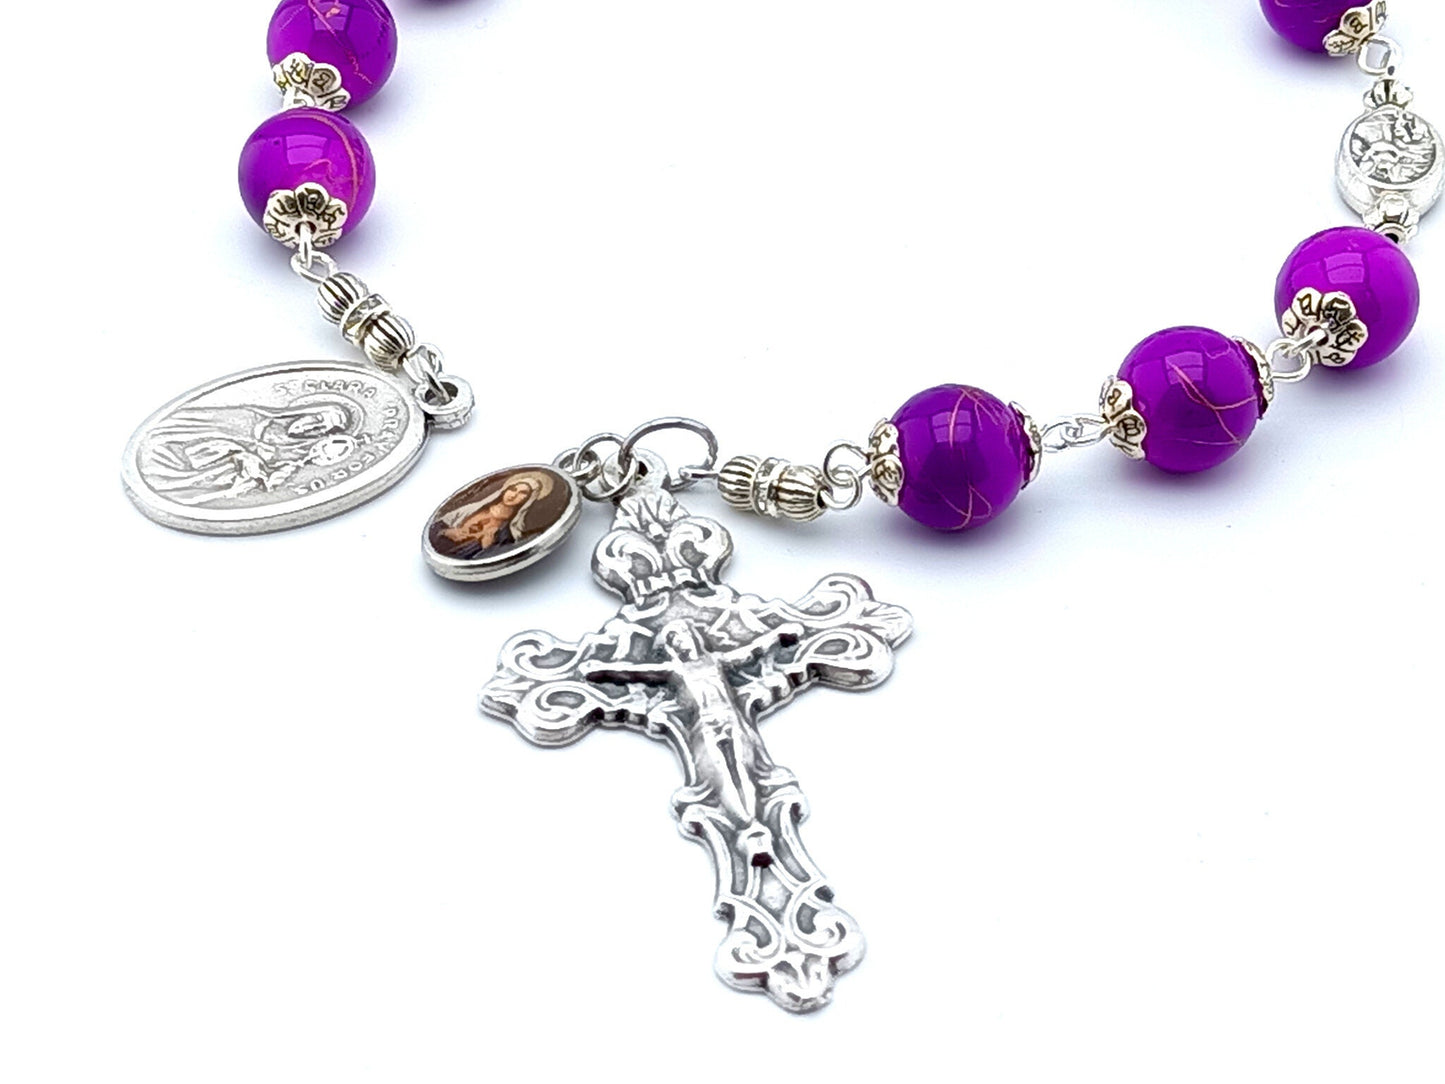 Saint Clare unique rosary beads prayer chaplet with purple gemstone beads, silver crucifix and end medal.